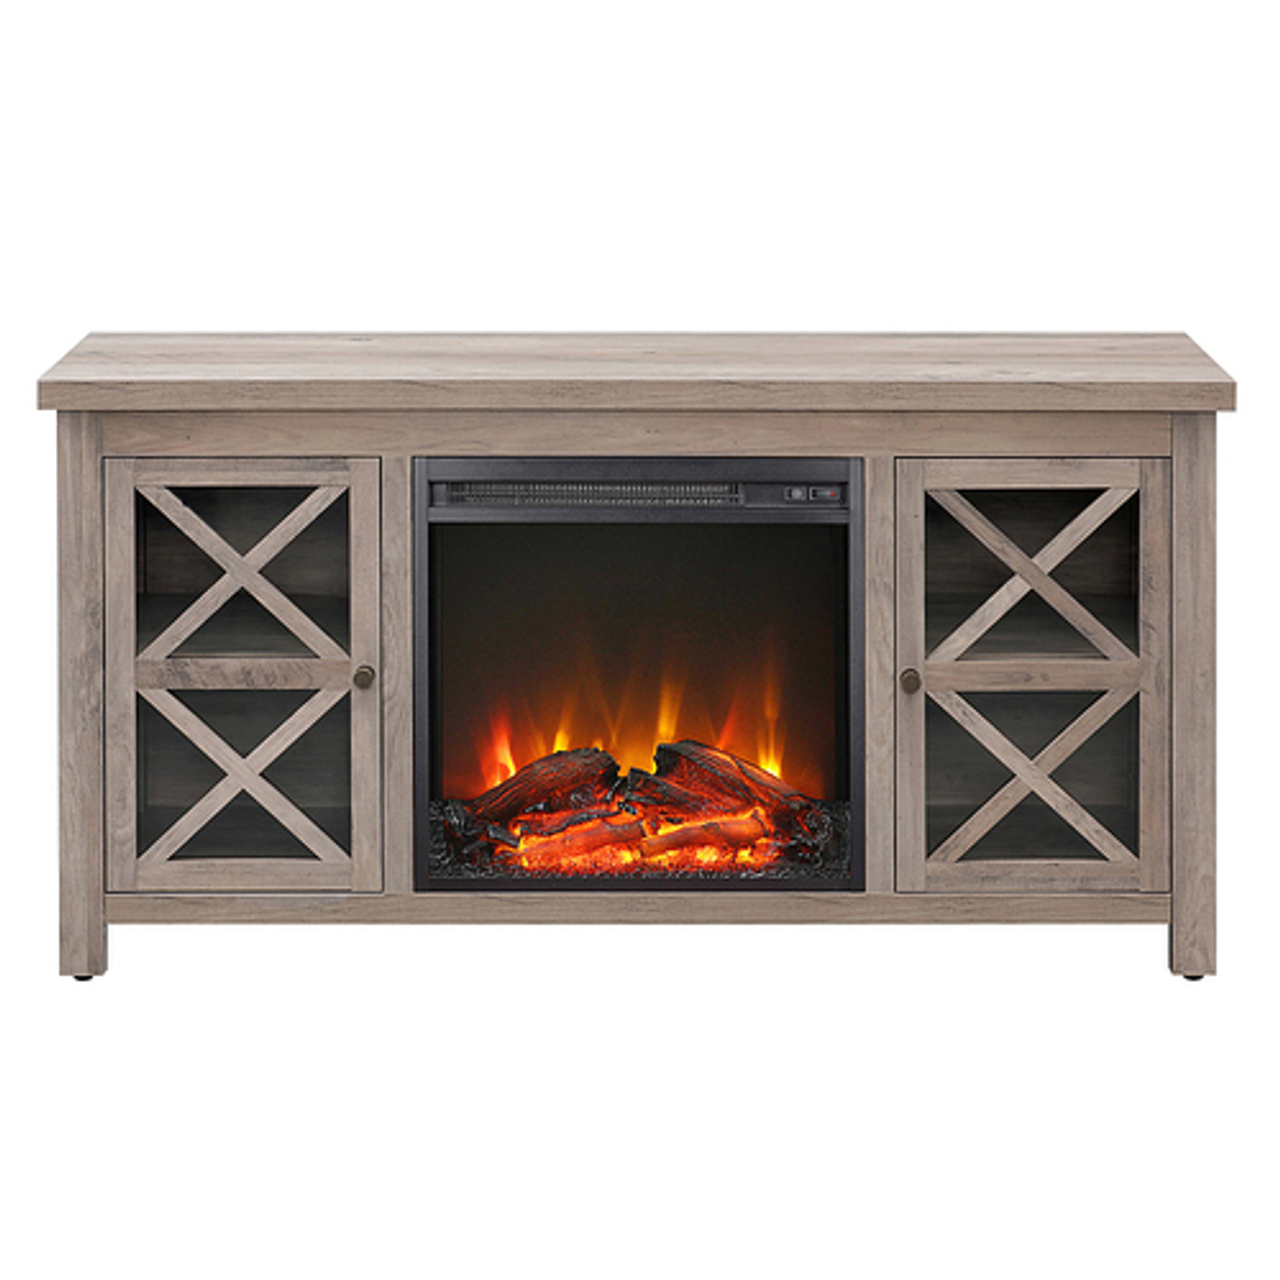 Camden&Wells - Colton 47.75" TV Stand with Log Fireplace - Gray Oak